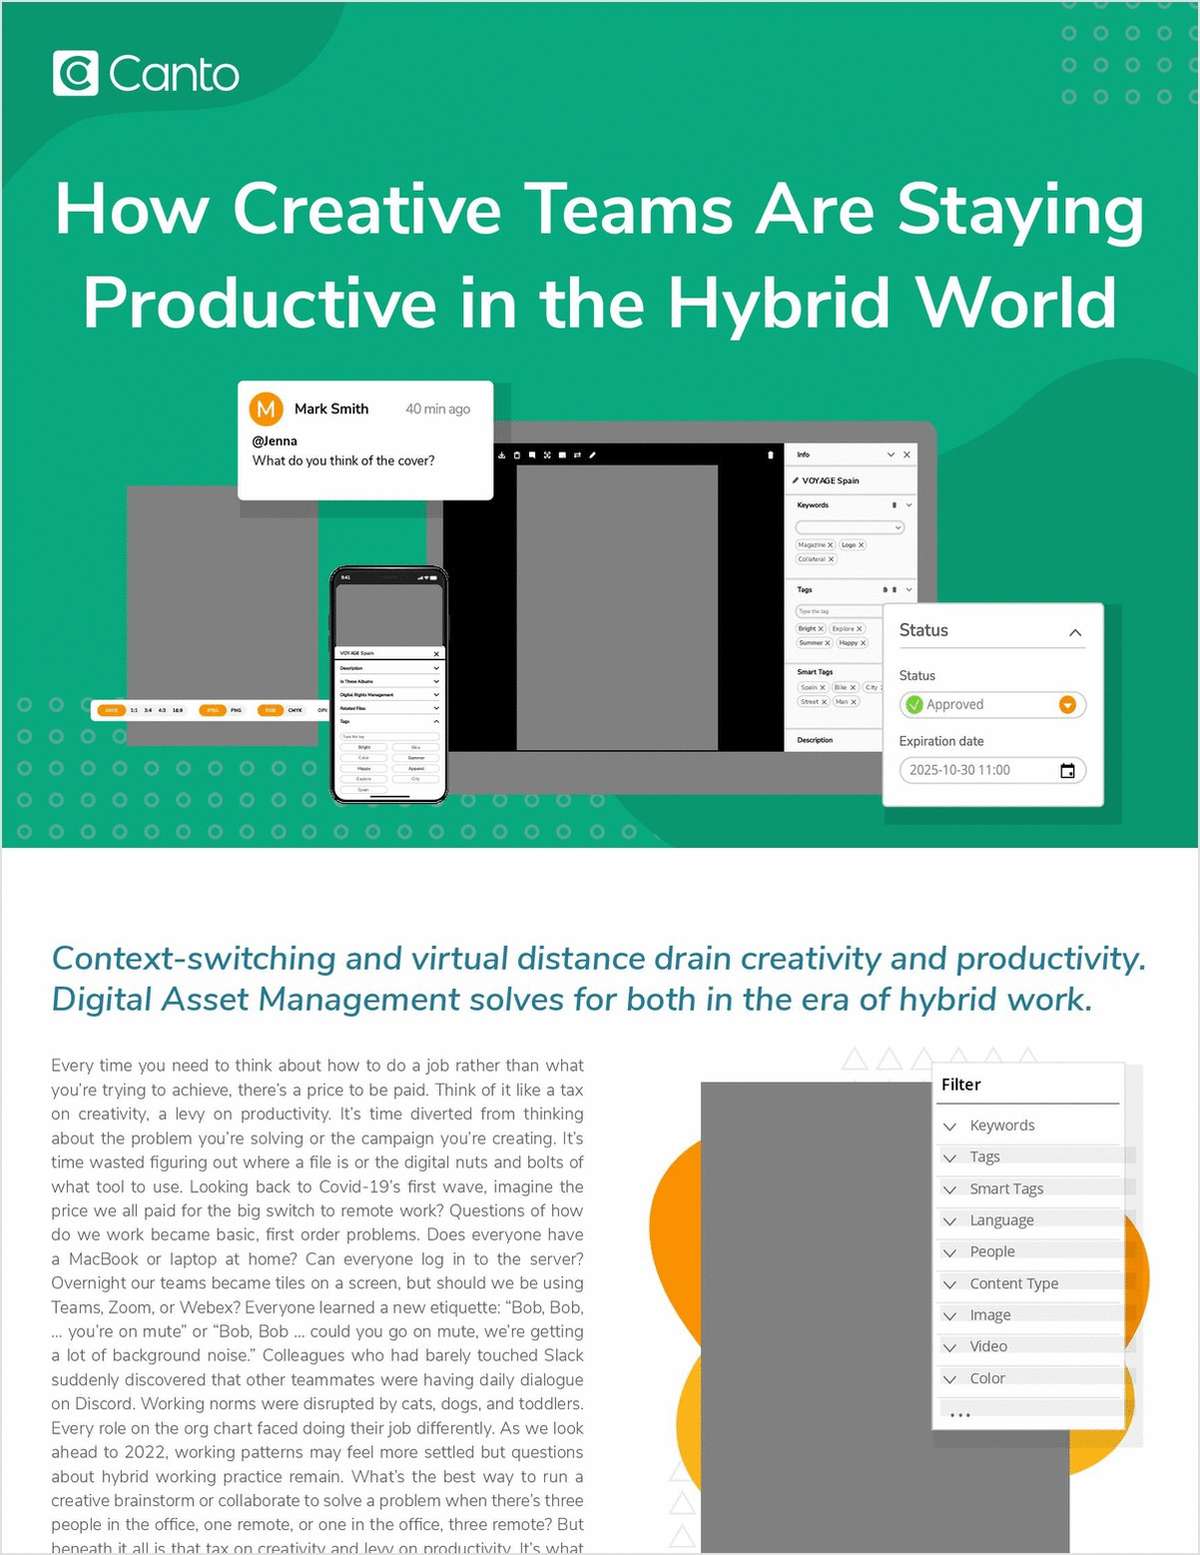 How Creative Teams Are Staying Productive in the Hybrid World